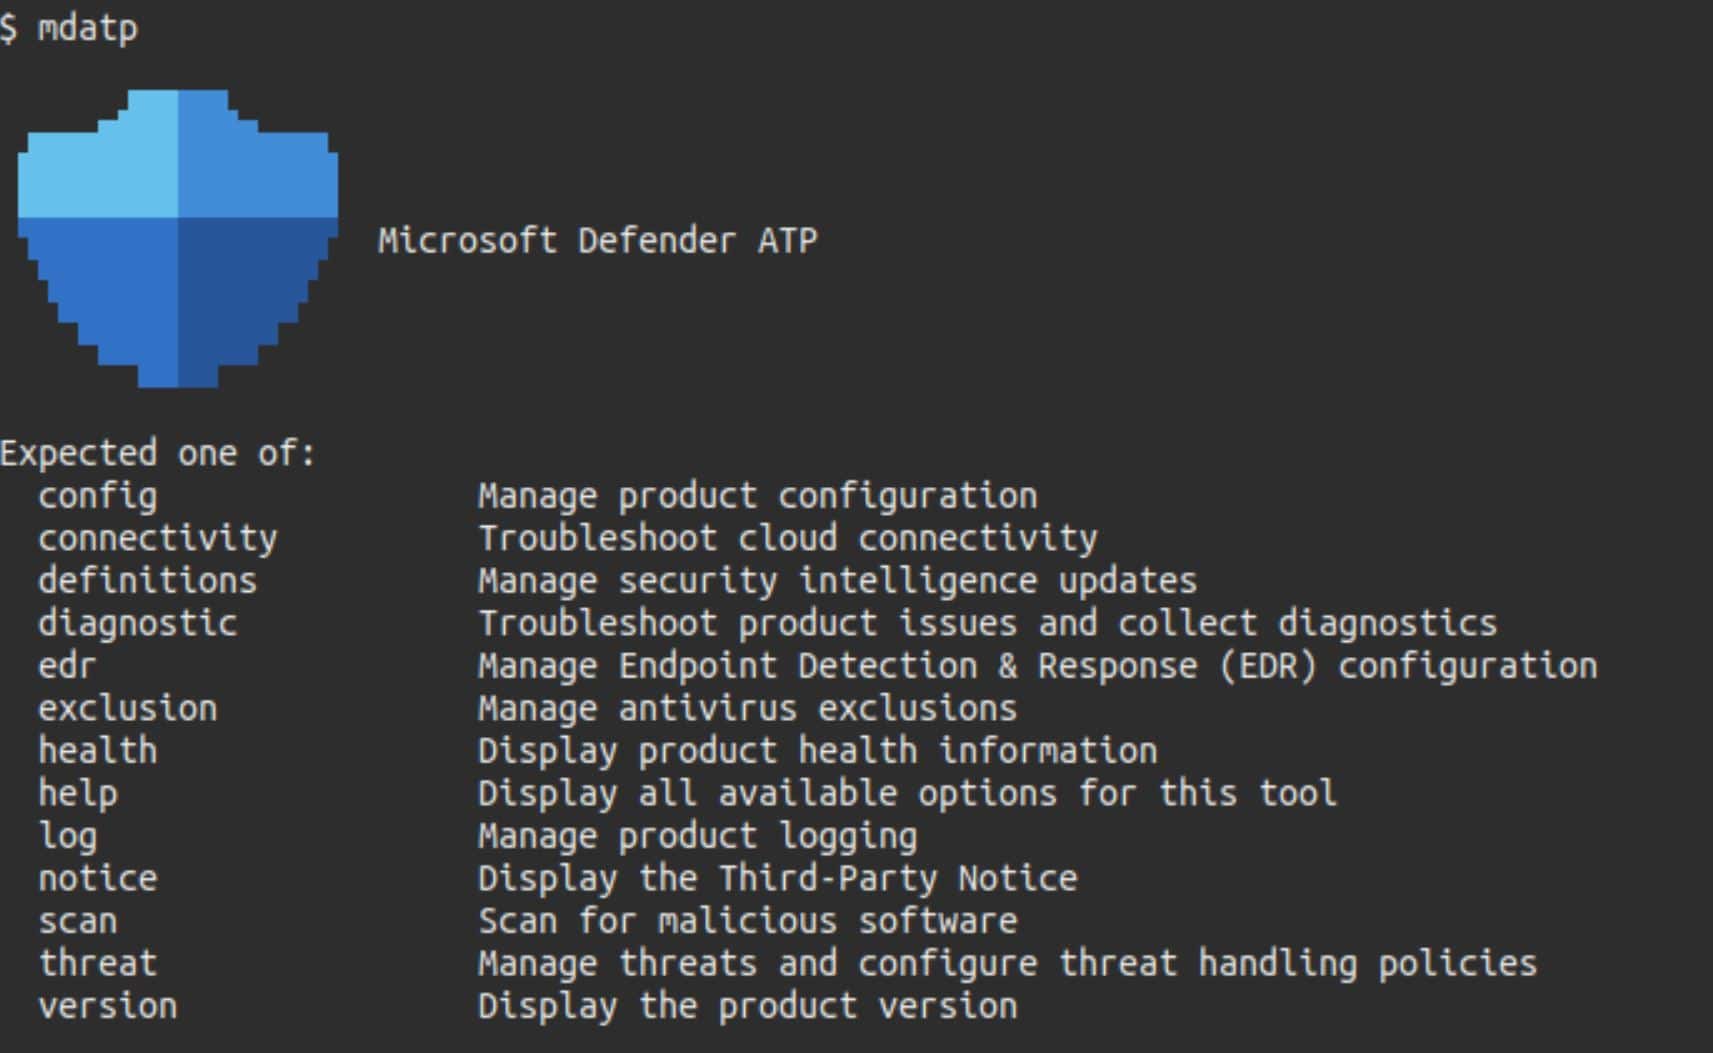 Microsoft Defender ATP security service now available for Linux